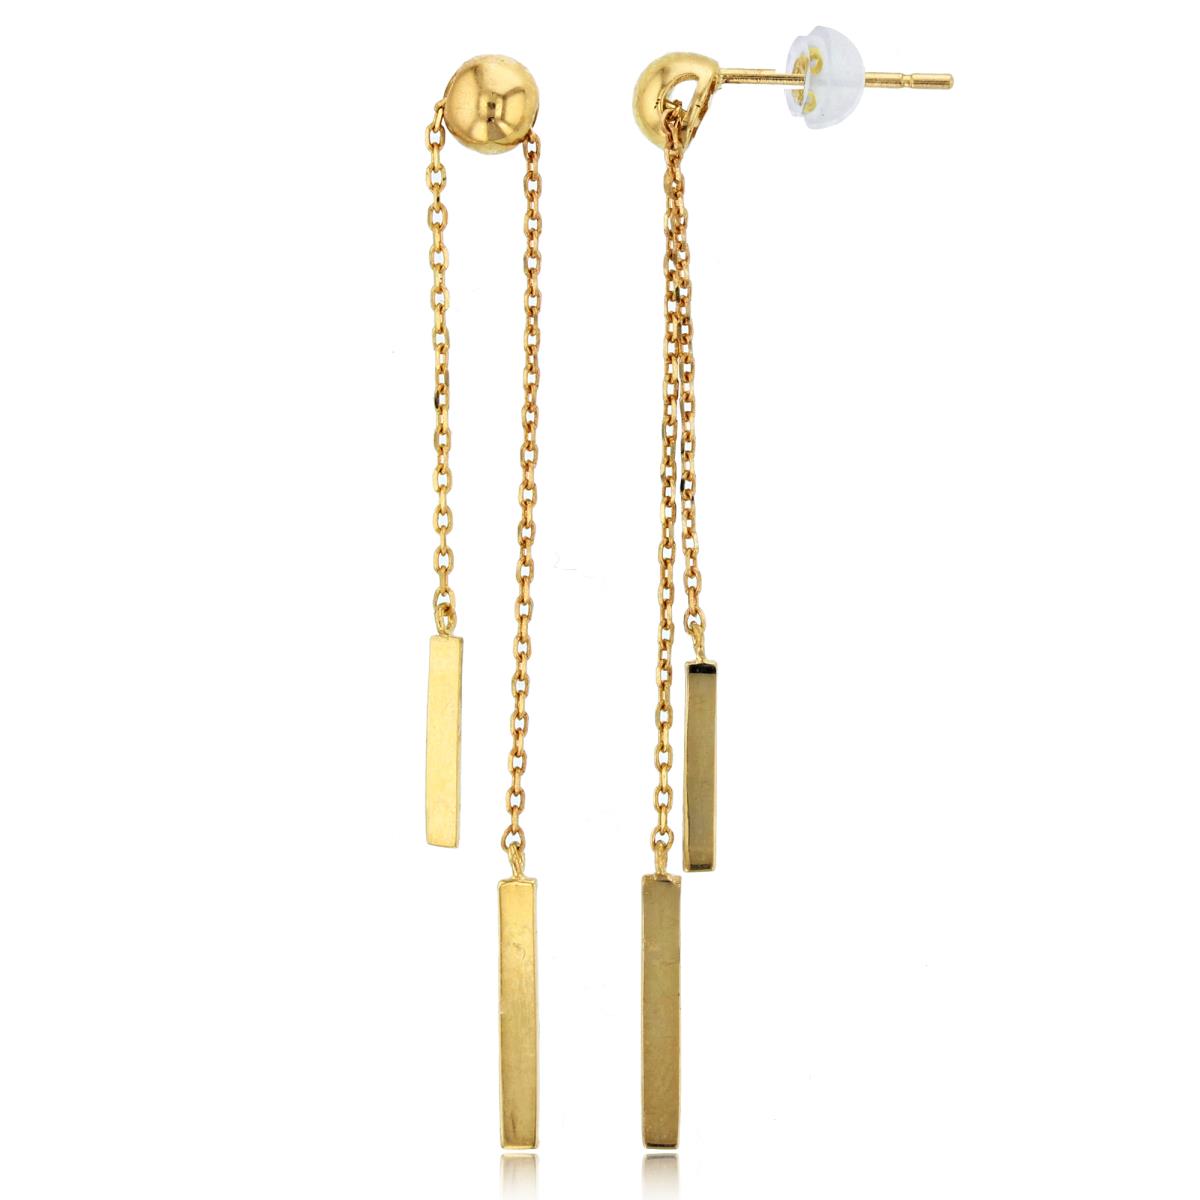 10K Yellow Gold High Polished Bars Dangling on Chain Earring with Silicone Back